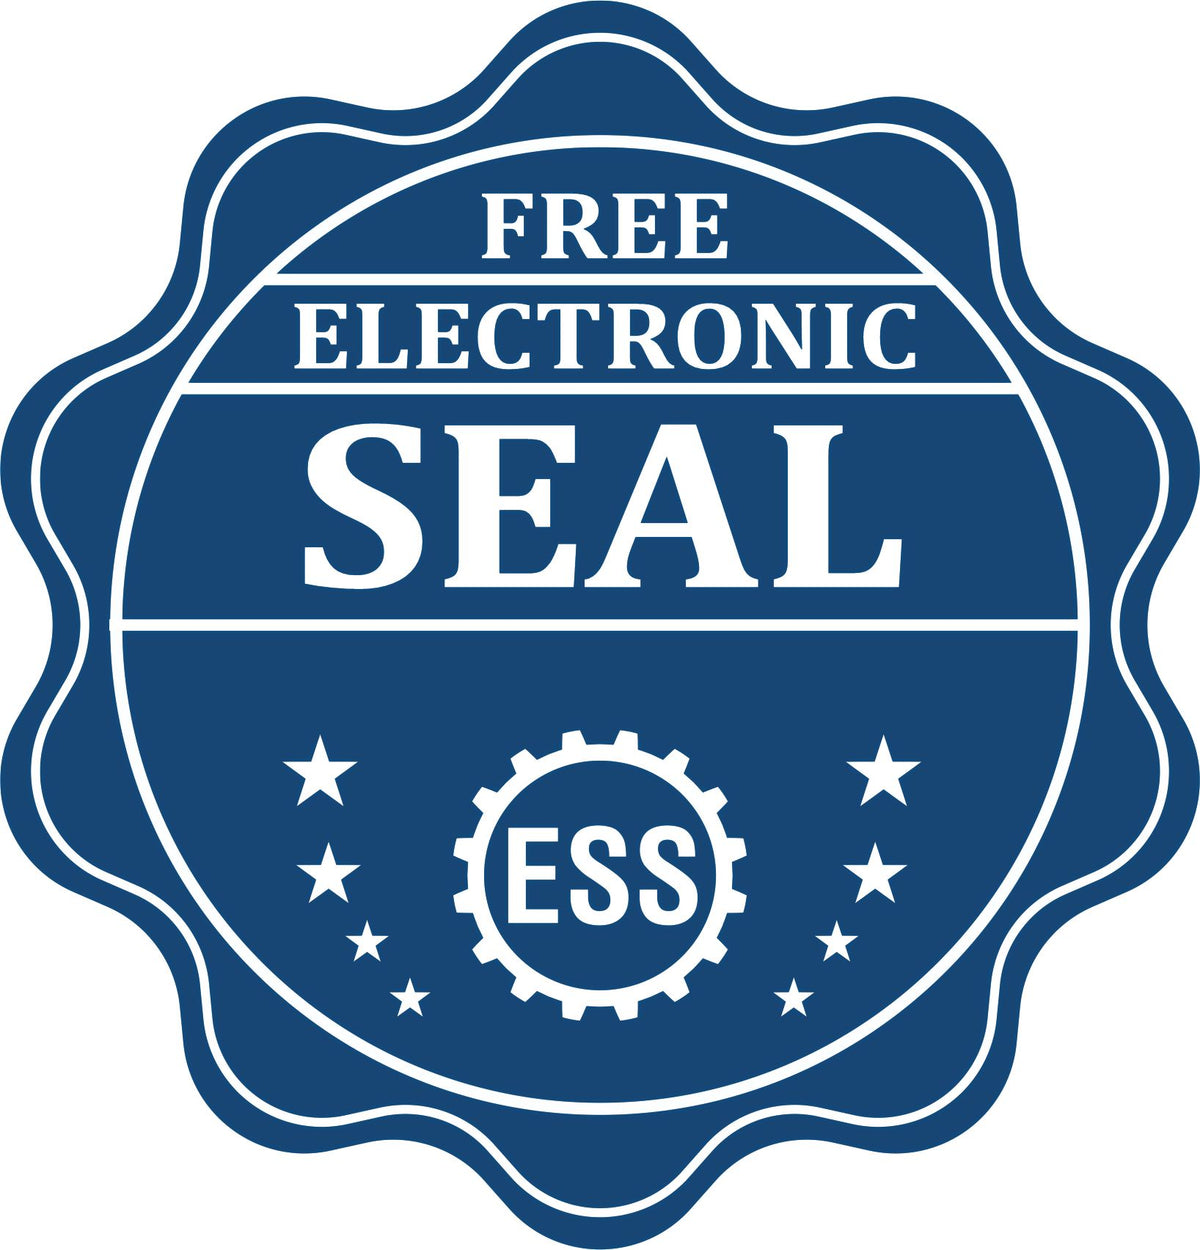 A badge showing a free electronic seal for the Delaware Professional Engineer Seal Stamp with stars and the ESS gear on the emblem.